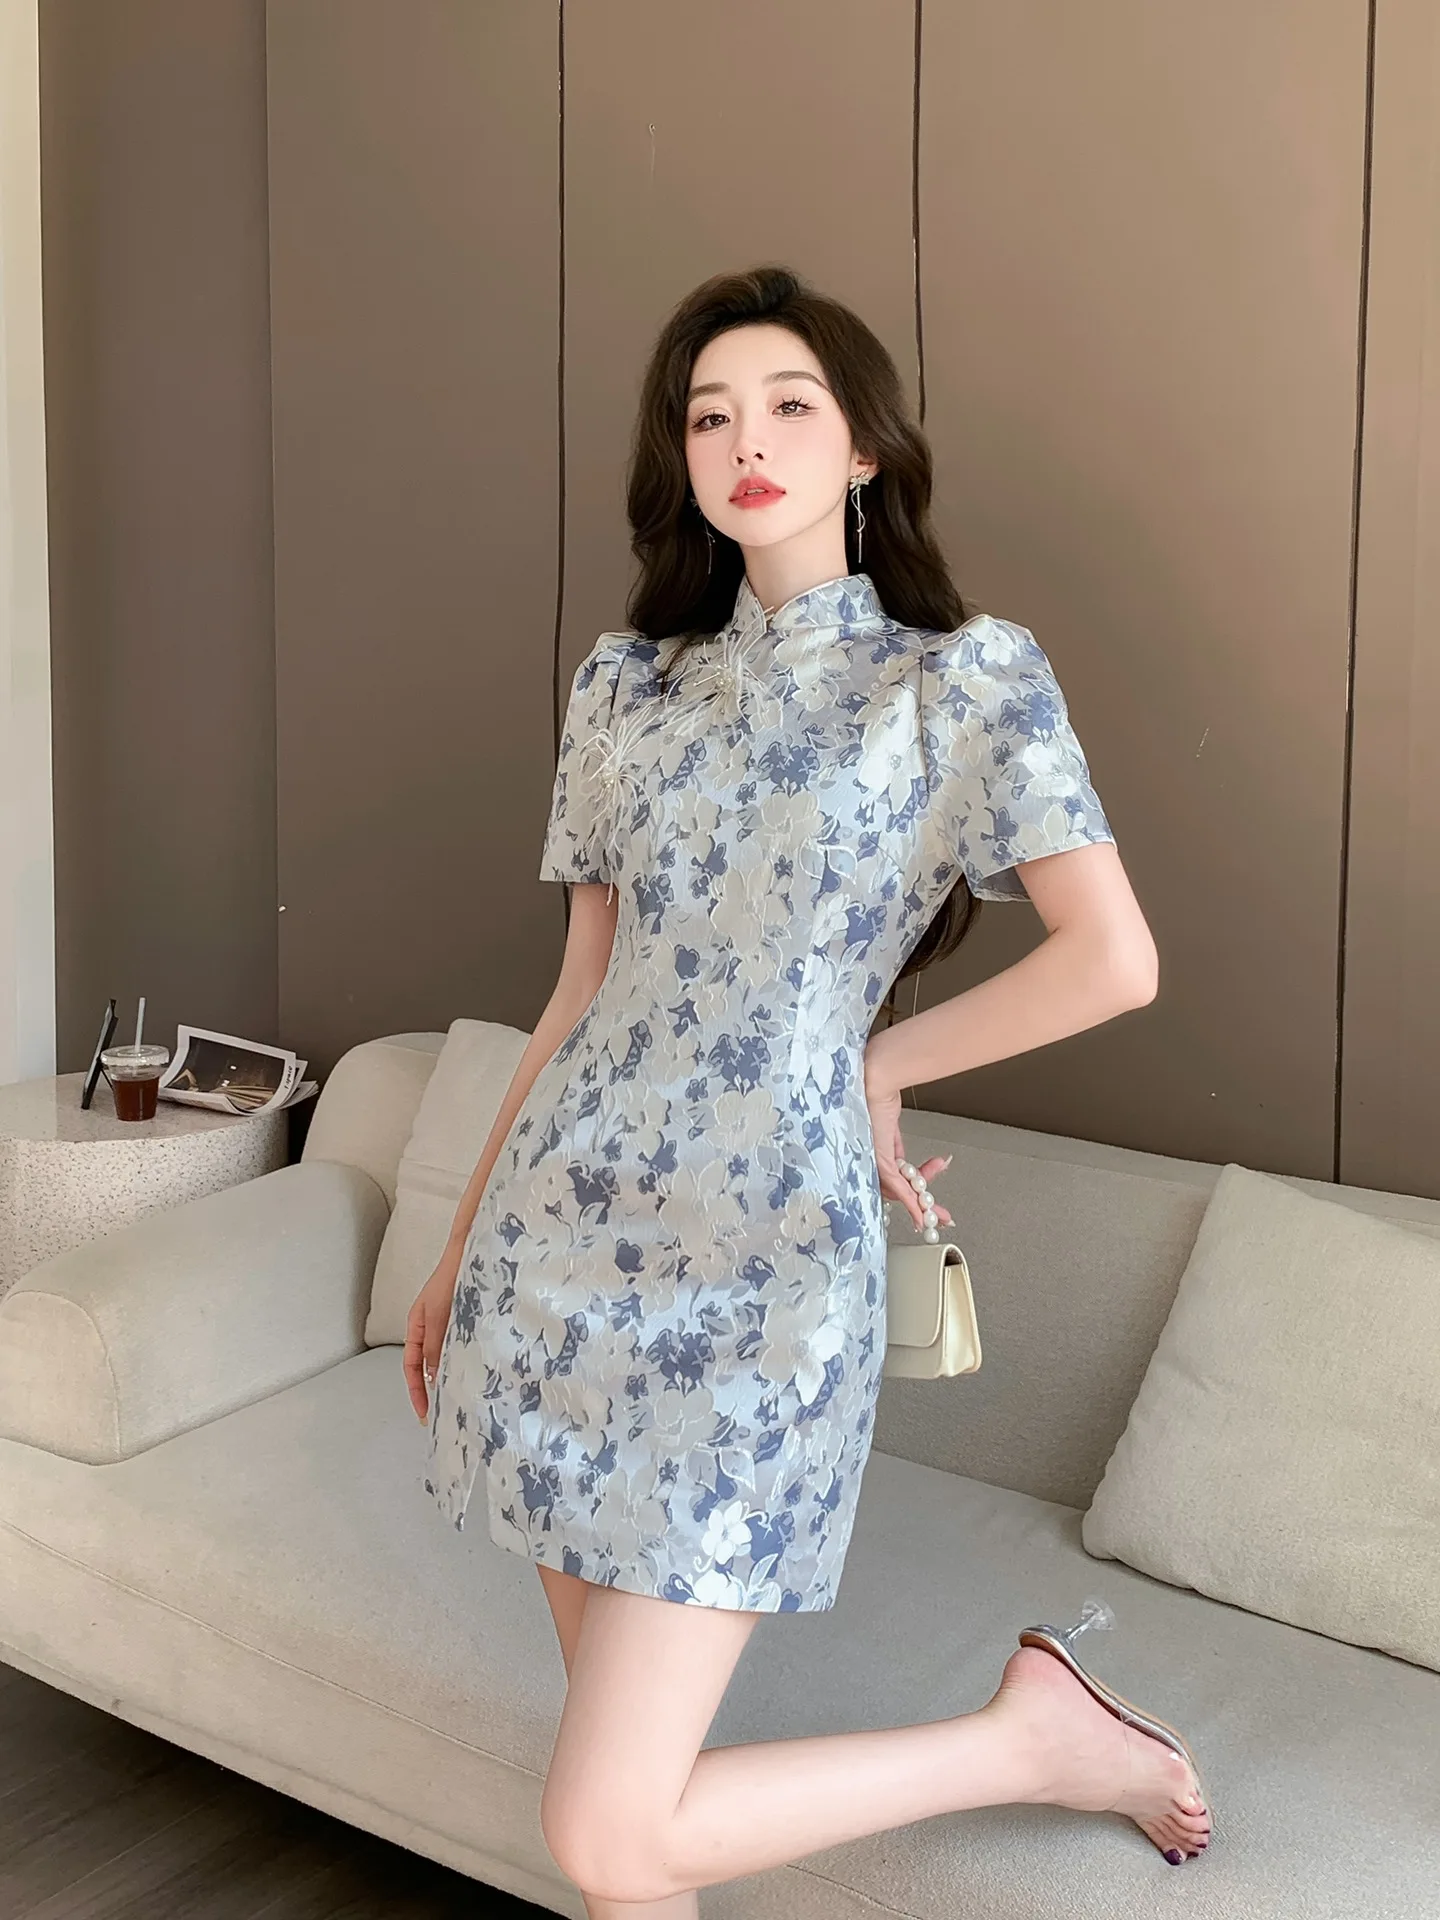 2023 Spring/Summer Fashion New Women's Clothing Stand-up Collar Jacquard Dress 0704